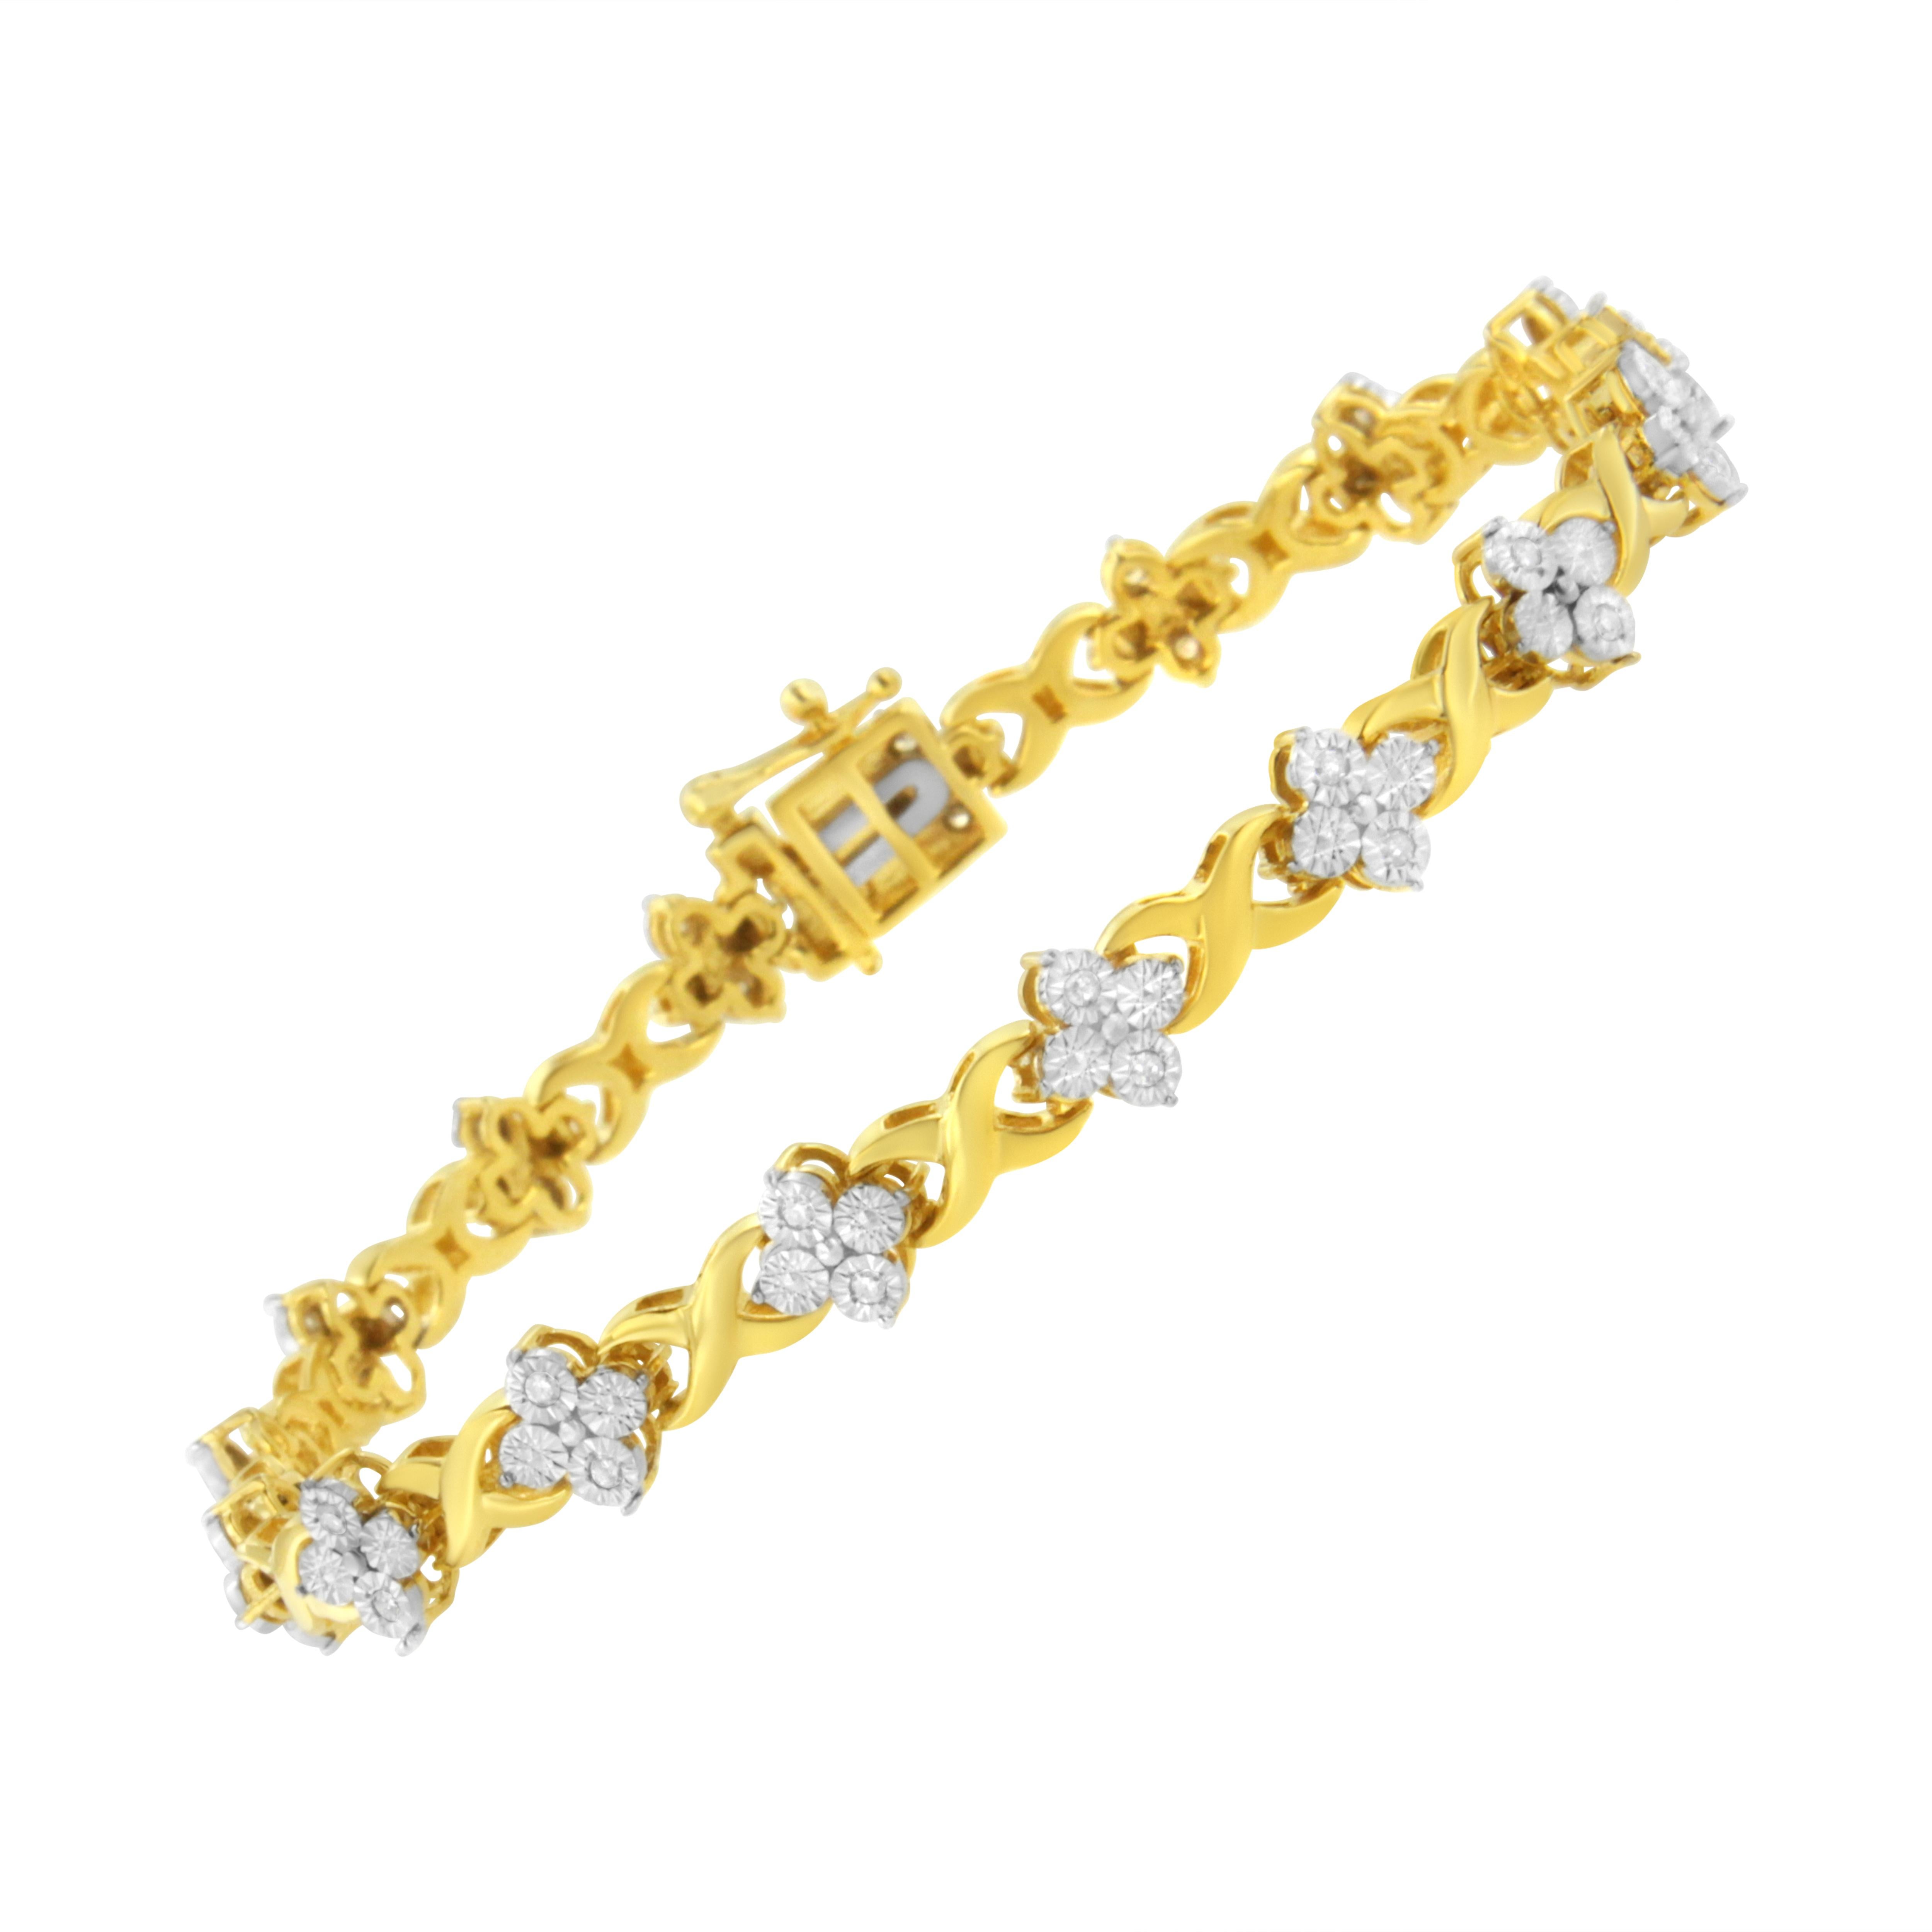 Introducing our exquisite 10K Yellow Gold Plated Sterling Silver 1/4 cttw Diamond 4 Leaf Clover Link Tennis Bracelet (I-J Color, I2-I3 Clarity) - Size 7.25